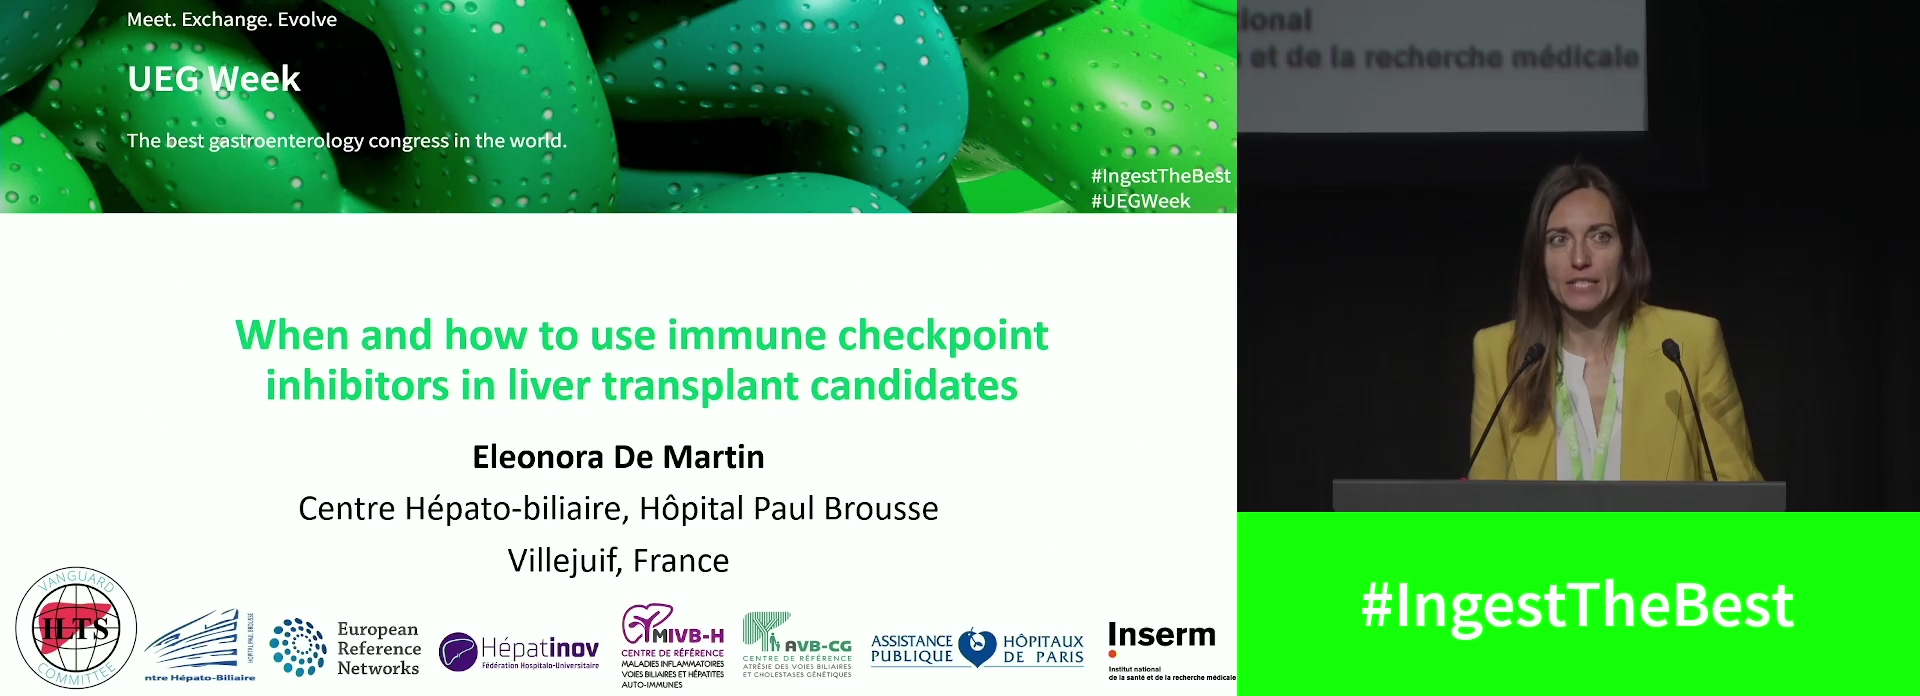 When and how to use immune checkpoint inhibitors in liver transplant candidates